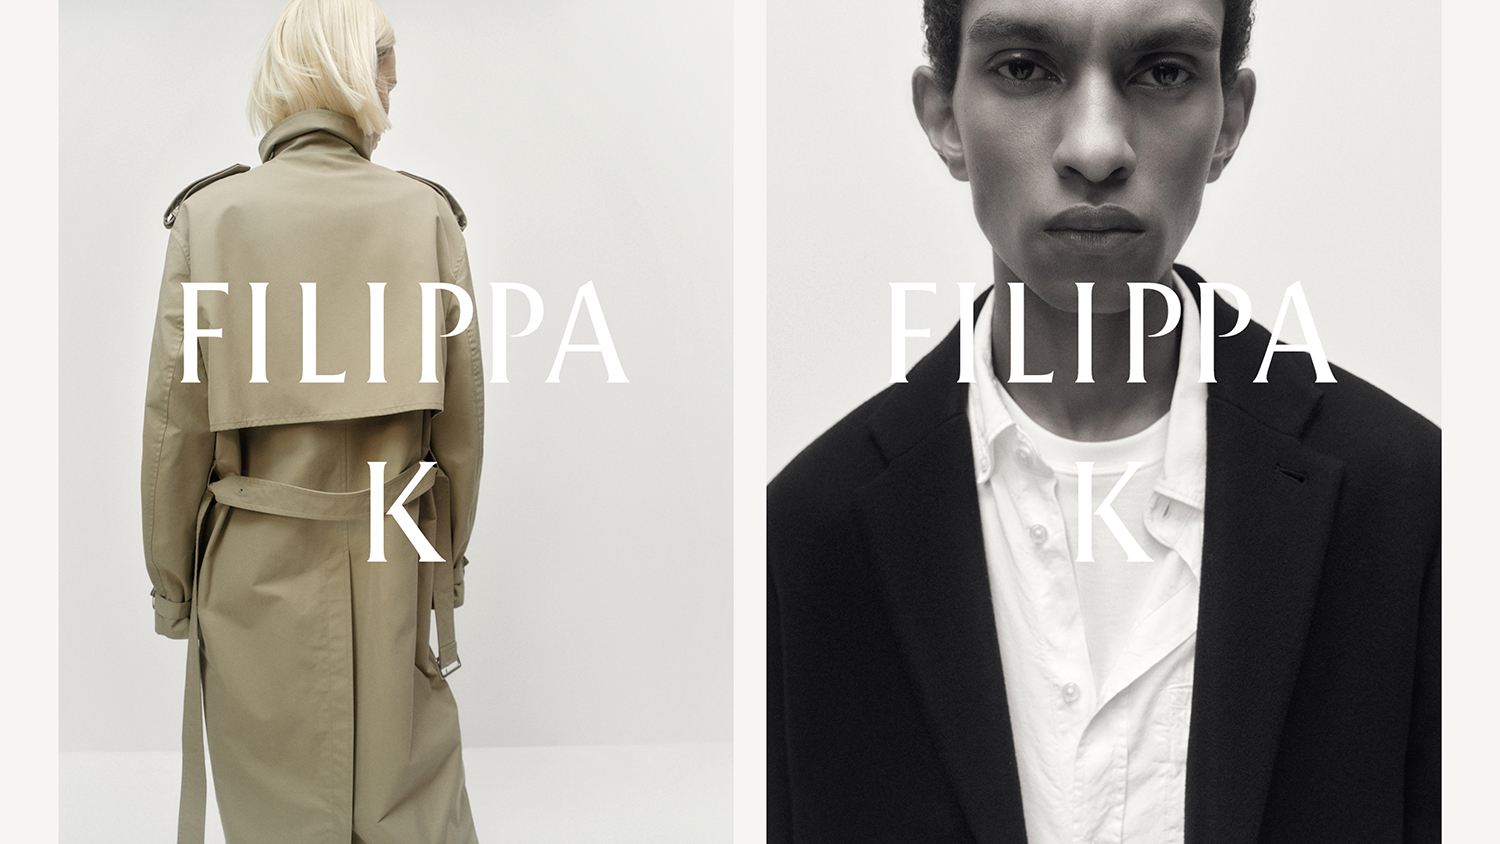 Filippa K SS24 campaign with creative lead Anna Teurnell, featuring Luisa Vagedes and Matthew Seymour.